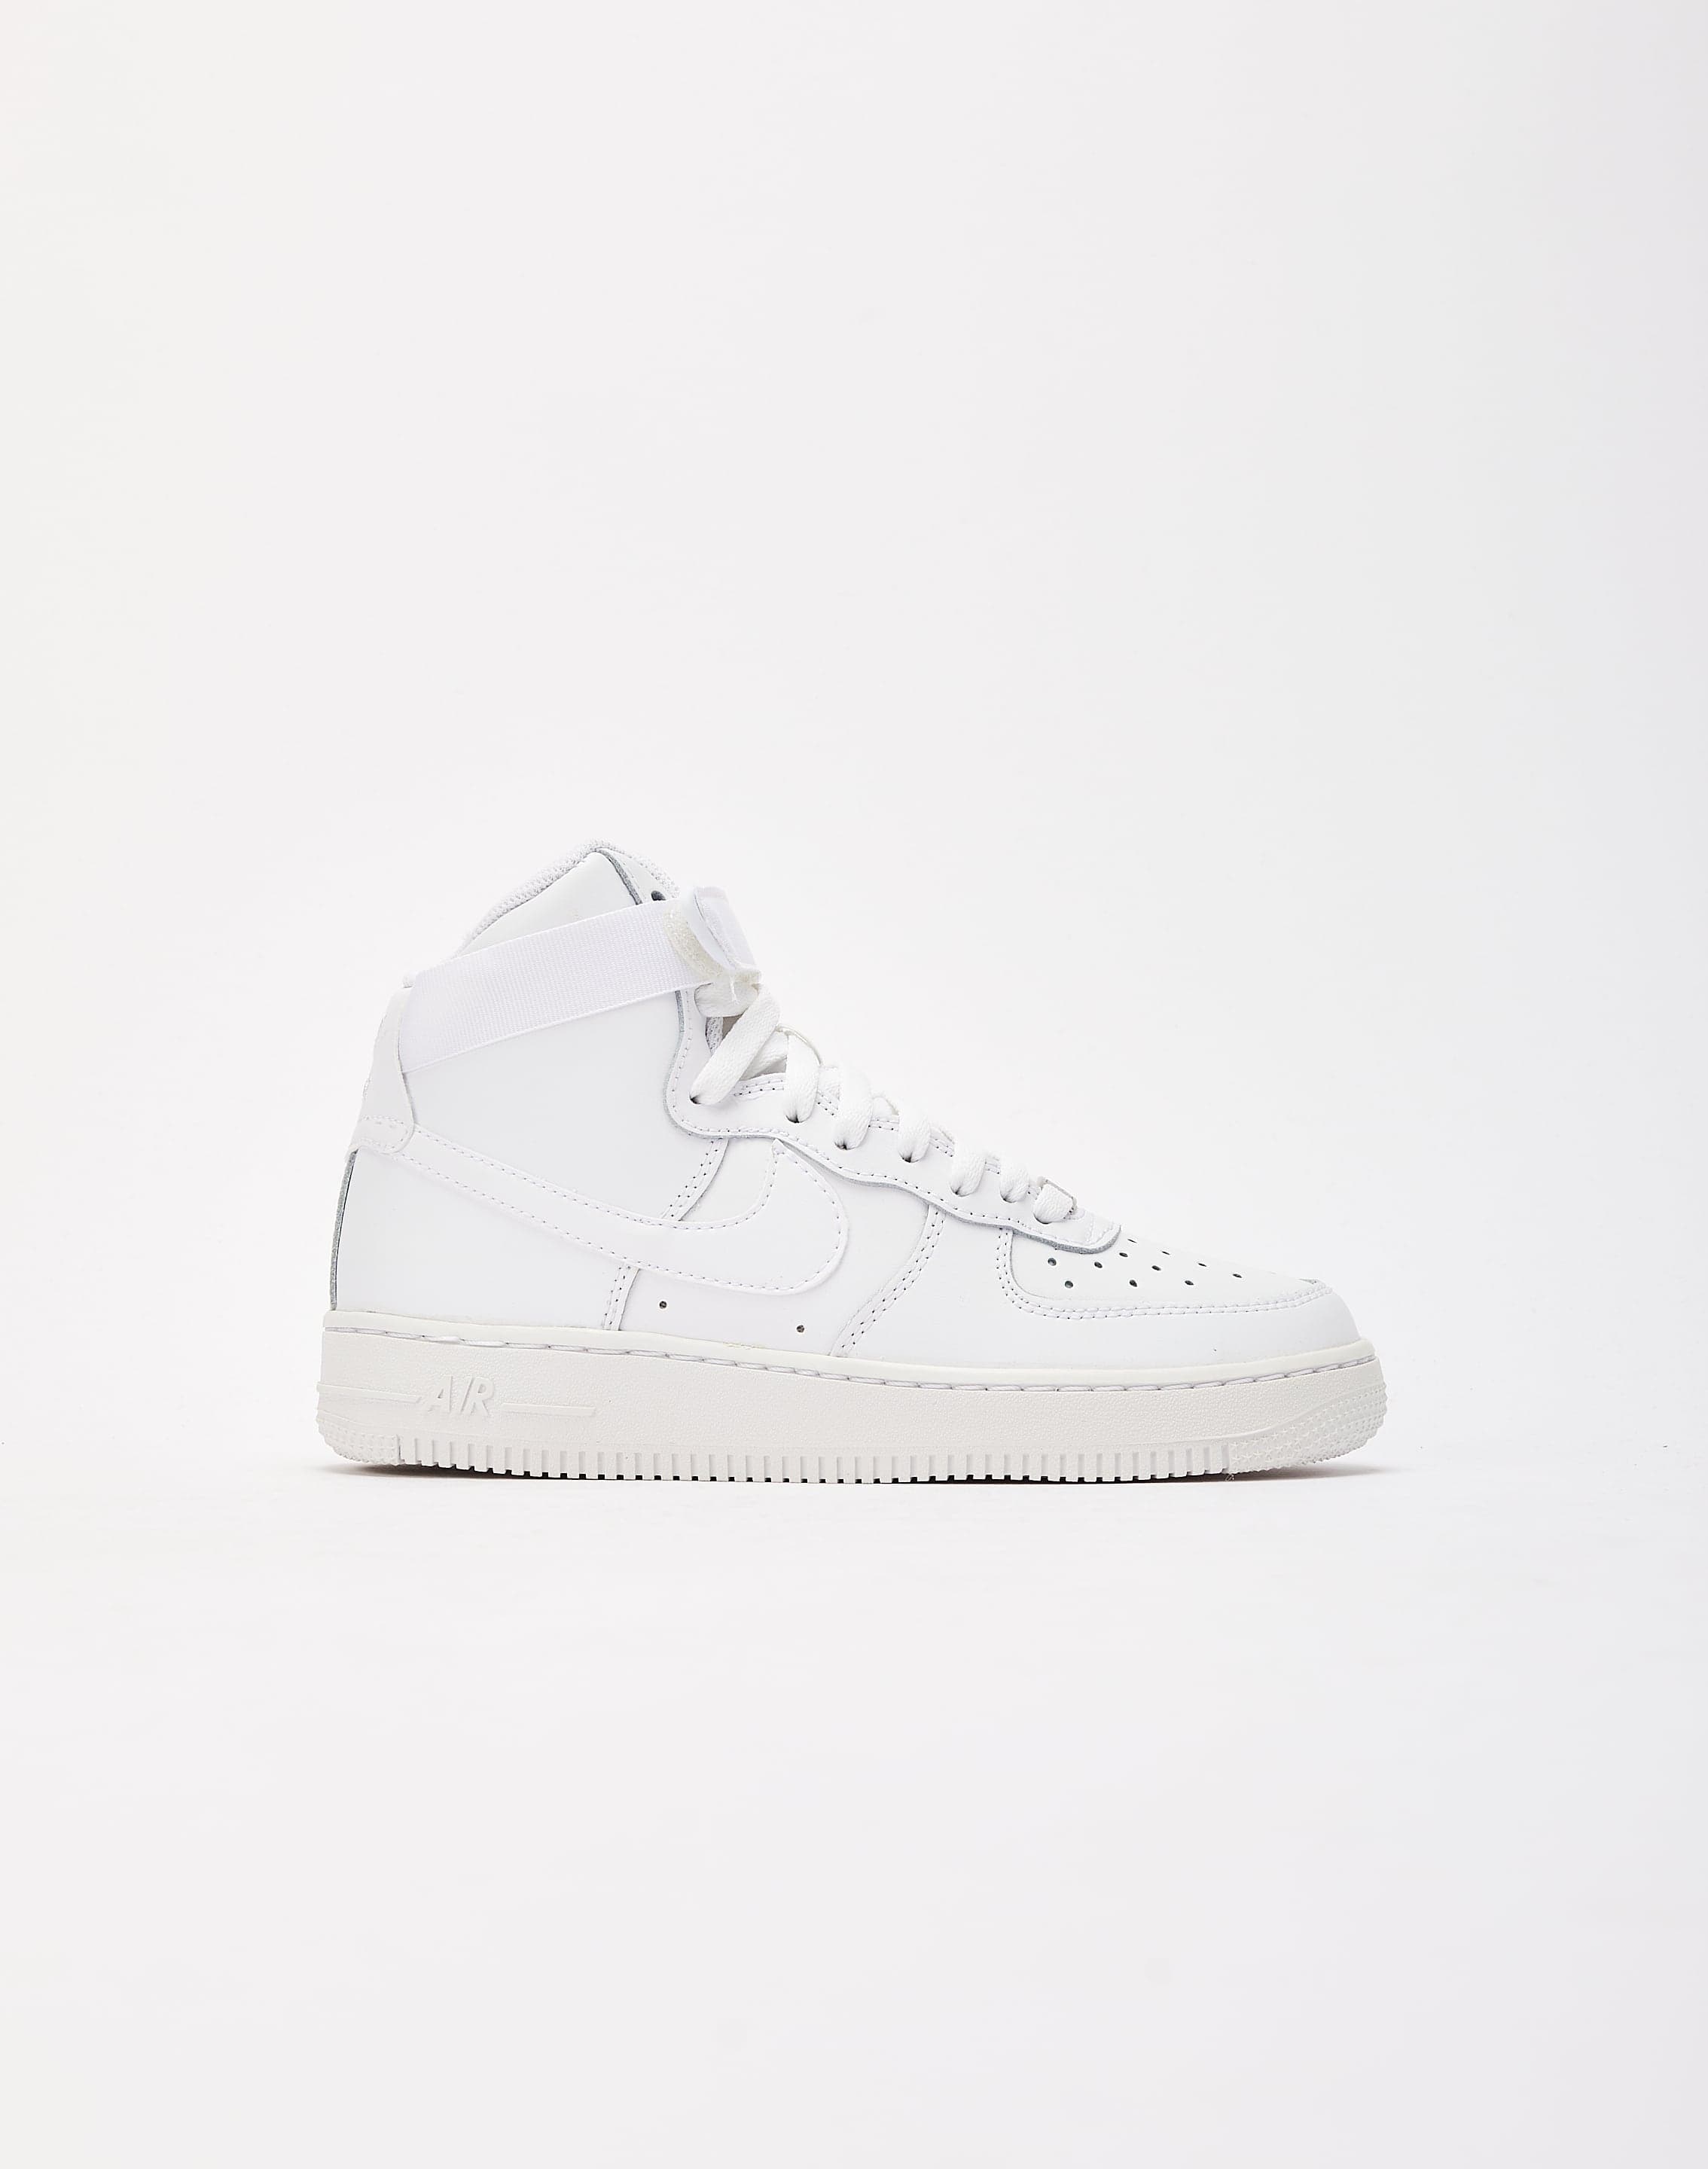 Nike Air Force 1 High Le DTLR